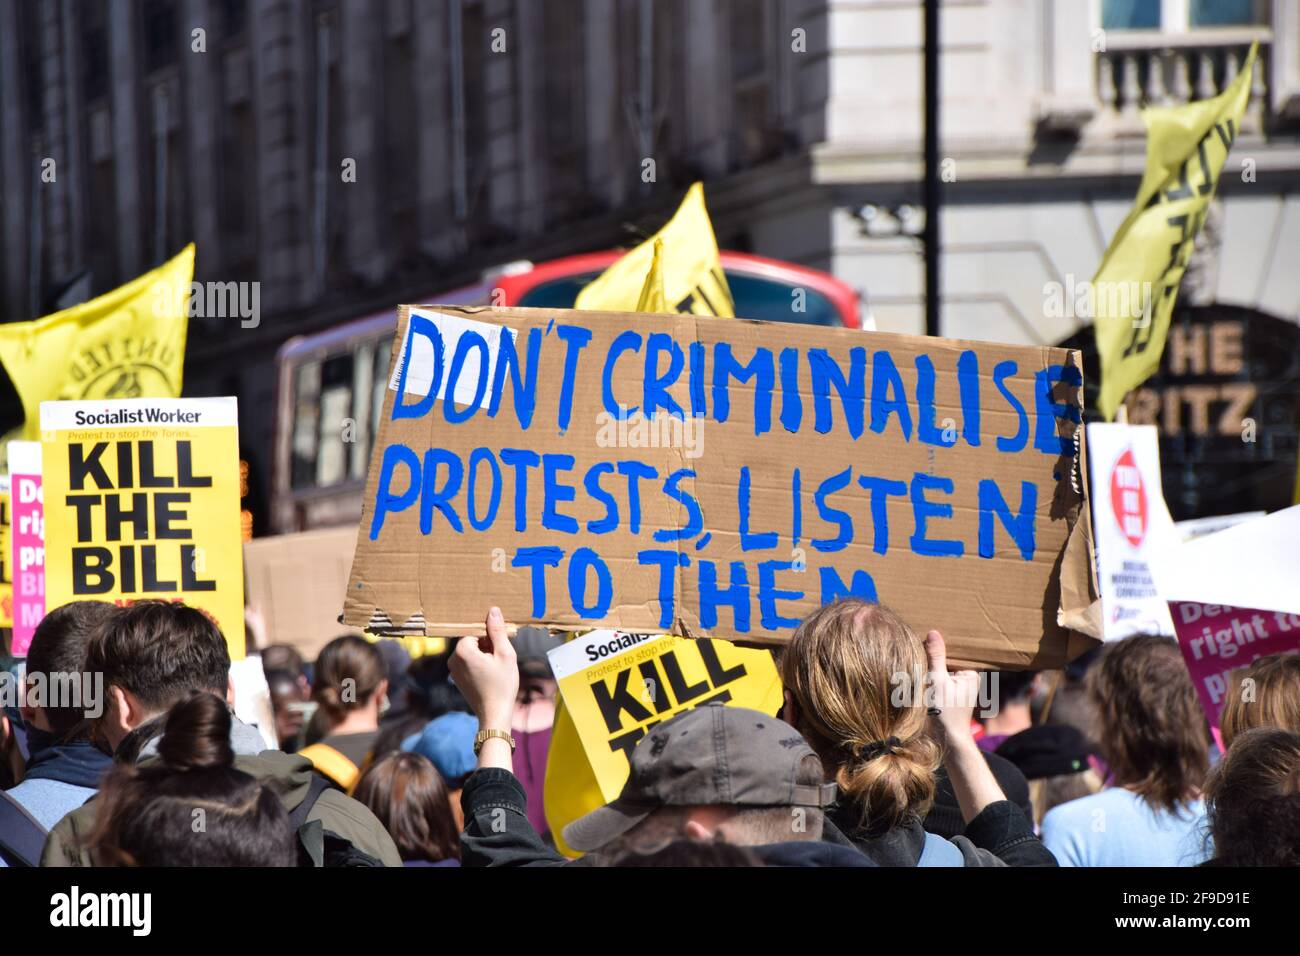 A protester holds a placard that says Don't Criminalise Protests, Listen To Them during the Kill The Bill protest in Central London.Crowds once again marched in protest against the Police, Crime, Sentencing and Courts Bill. Stock Photo